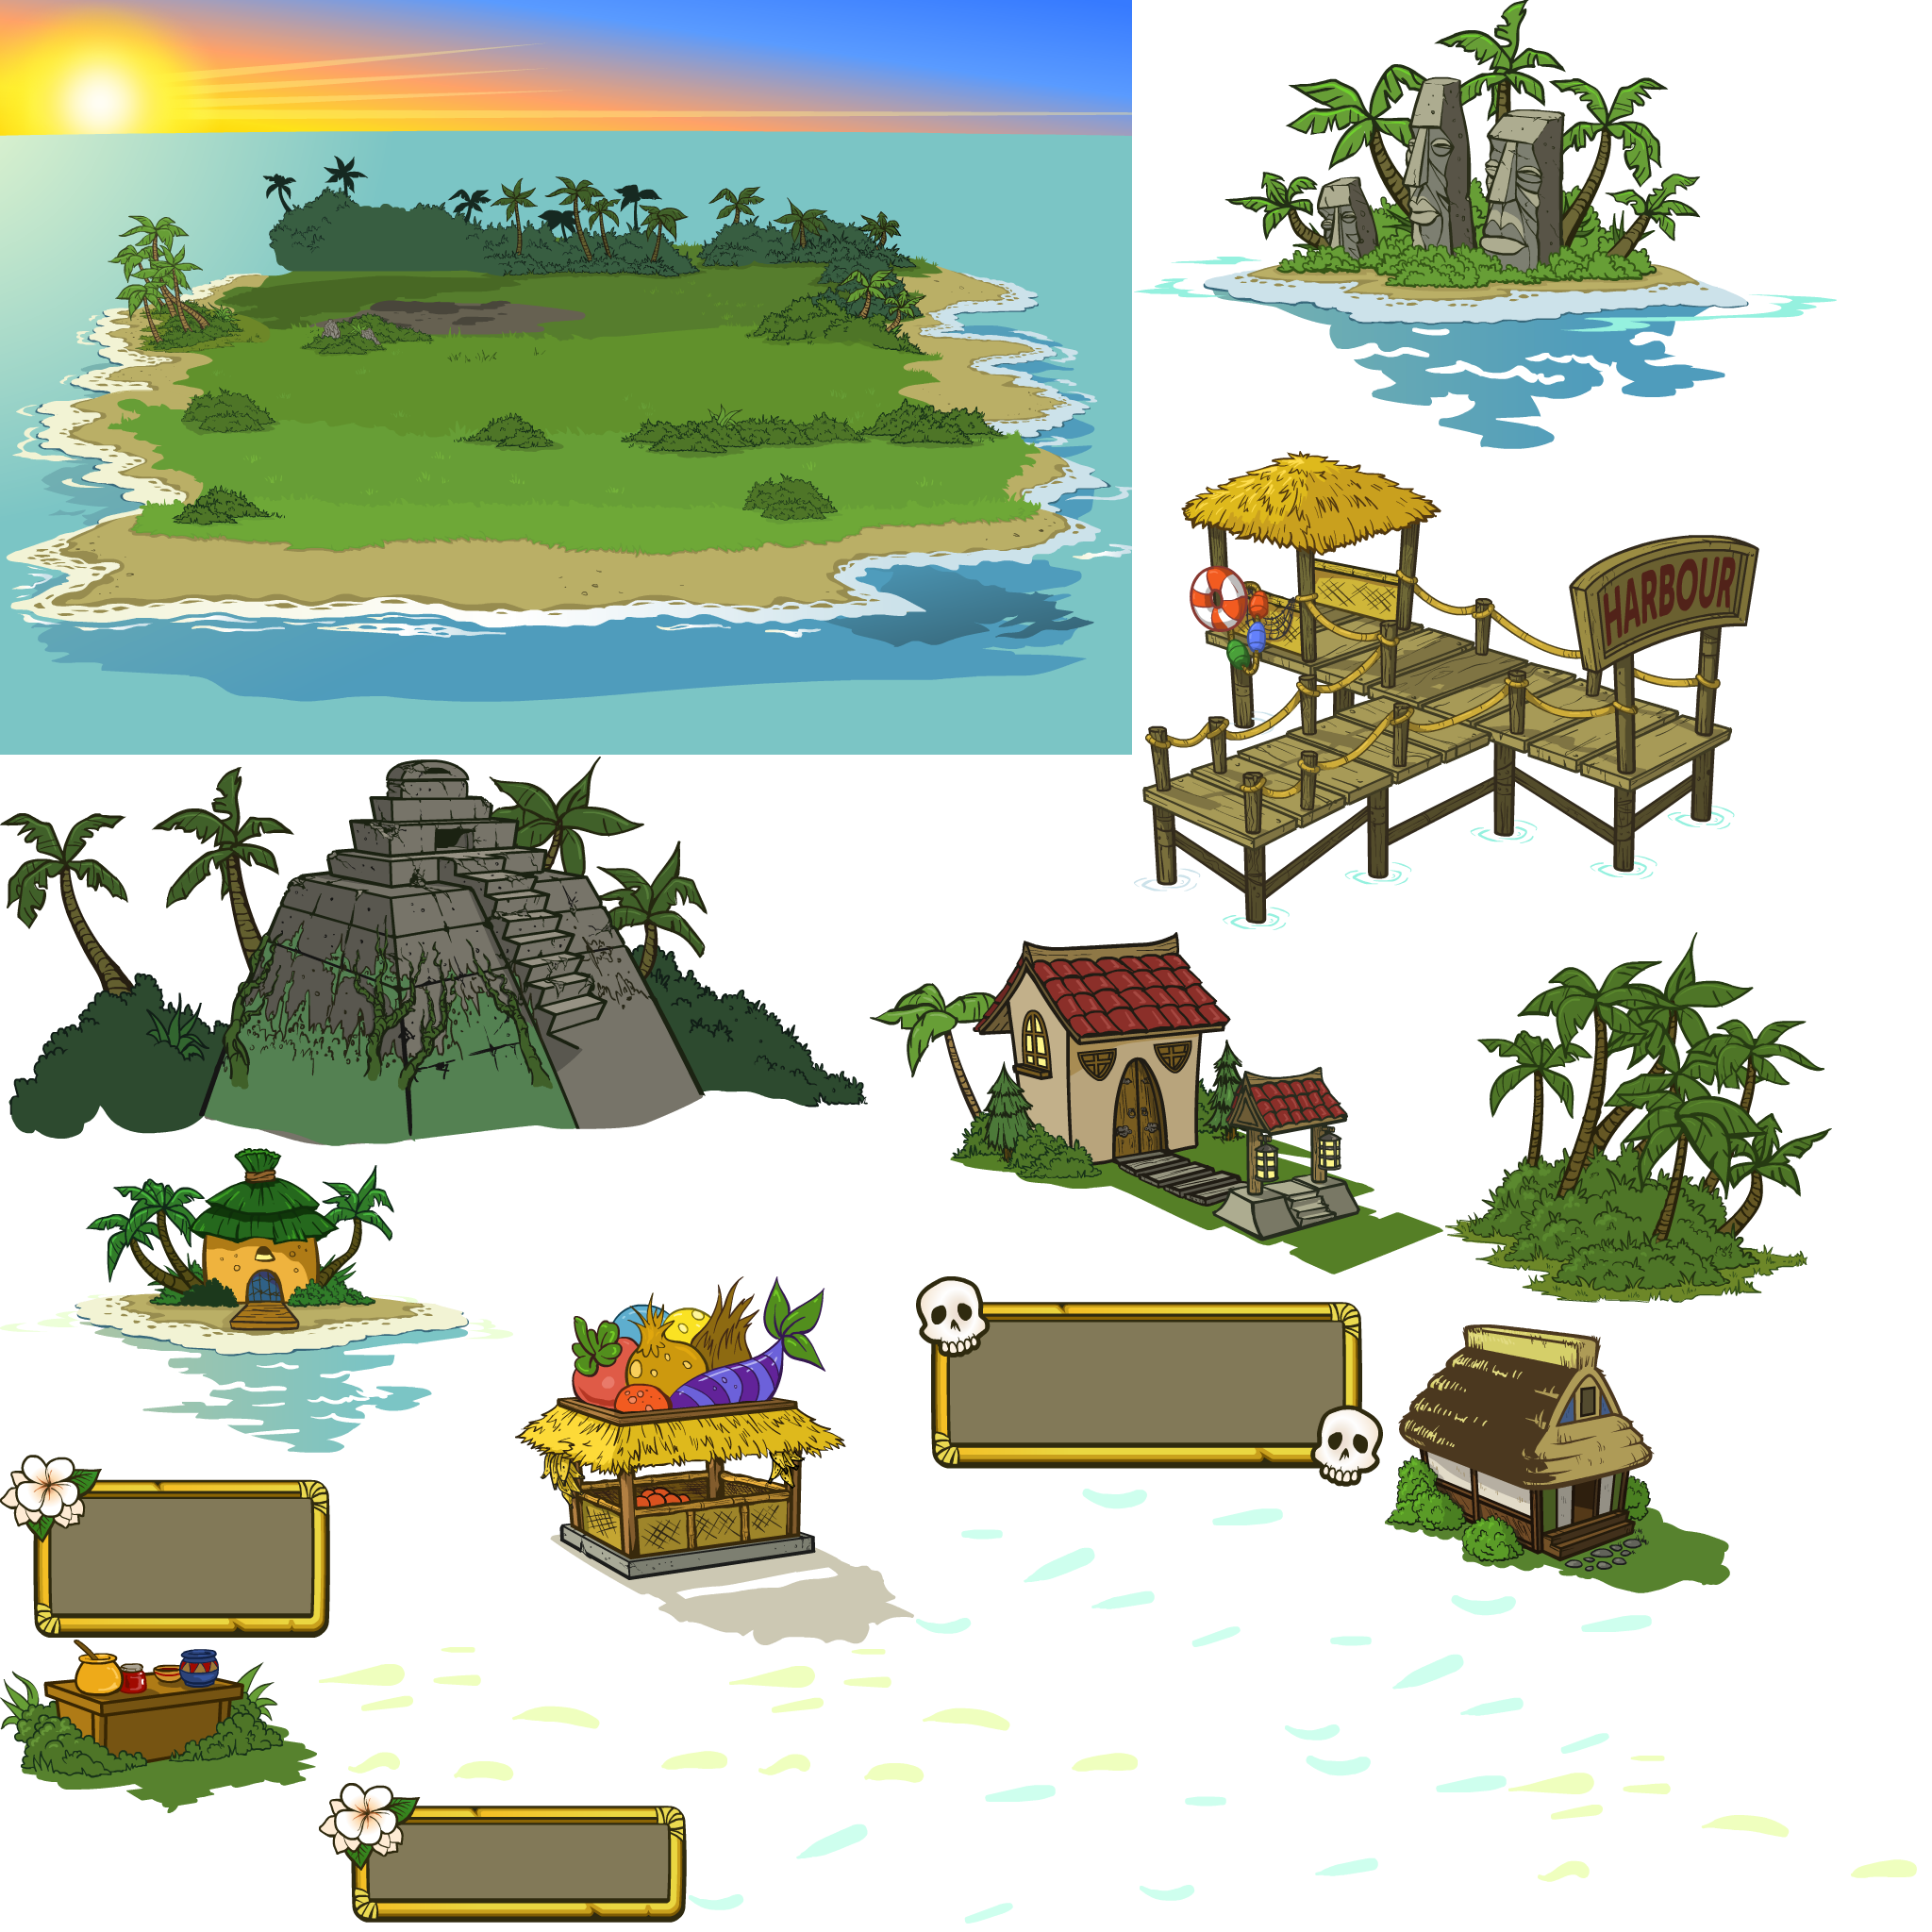 https://images.neopets.com/maps/island/h5/images/map_mystery_island_atlas_1.png